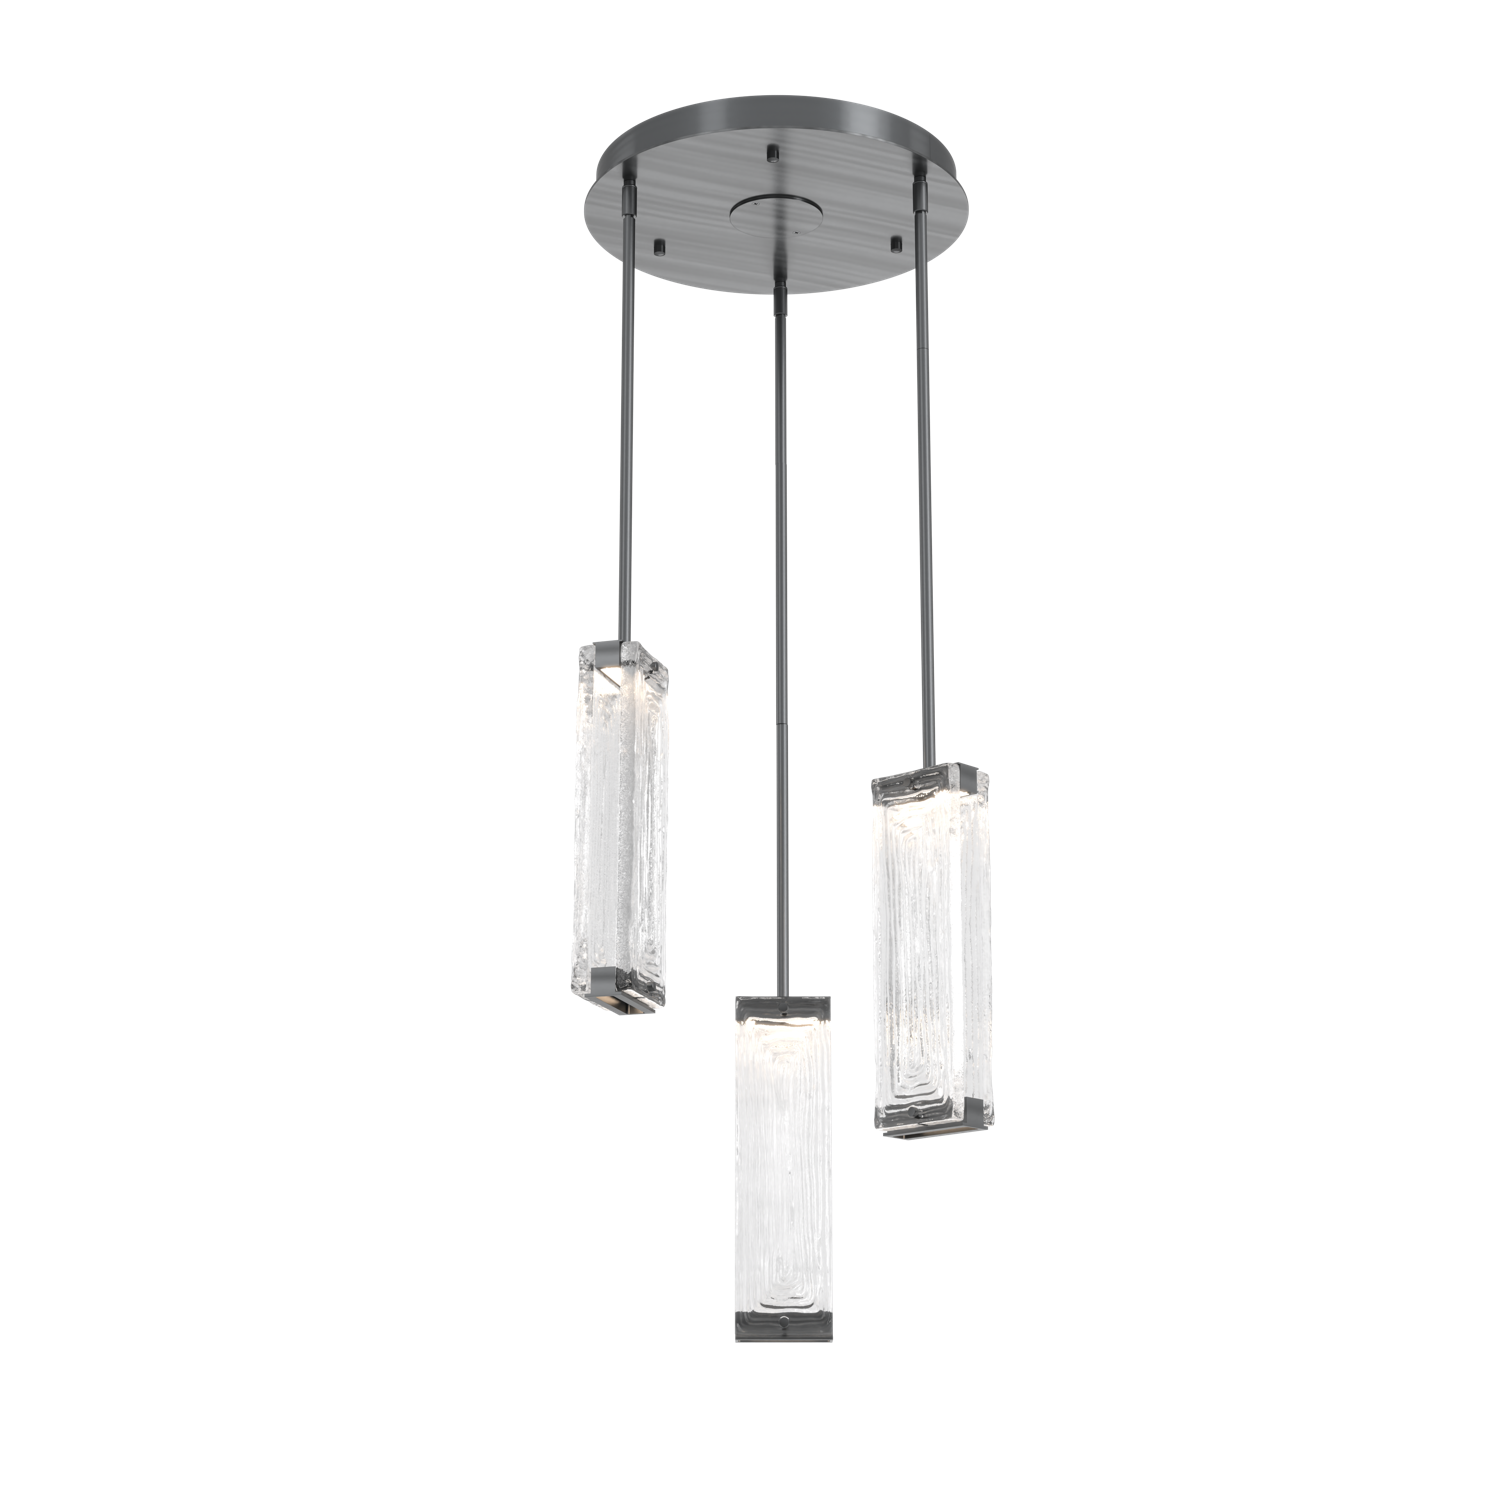 CHB0090-03-GM-TL-Hammerton-Studio-Tabulo-3-light-multi-pendant-chandelier-with-gunmetal-finish-and-clear-linea-cast-glass-shade-and-LED-lamping